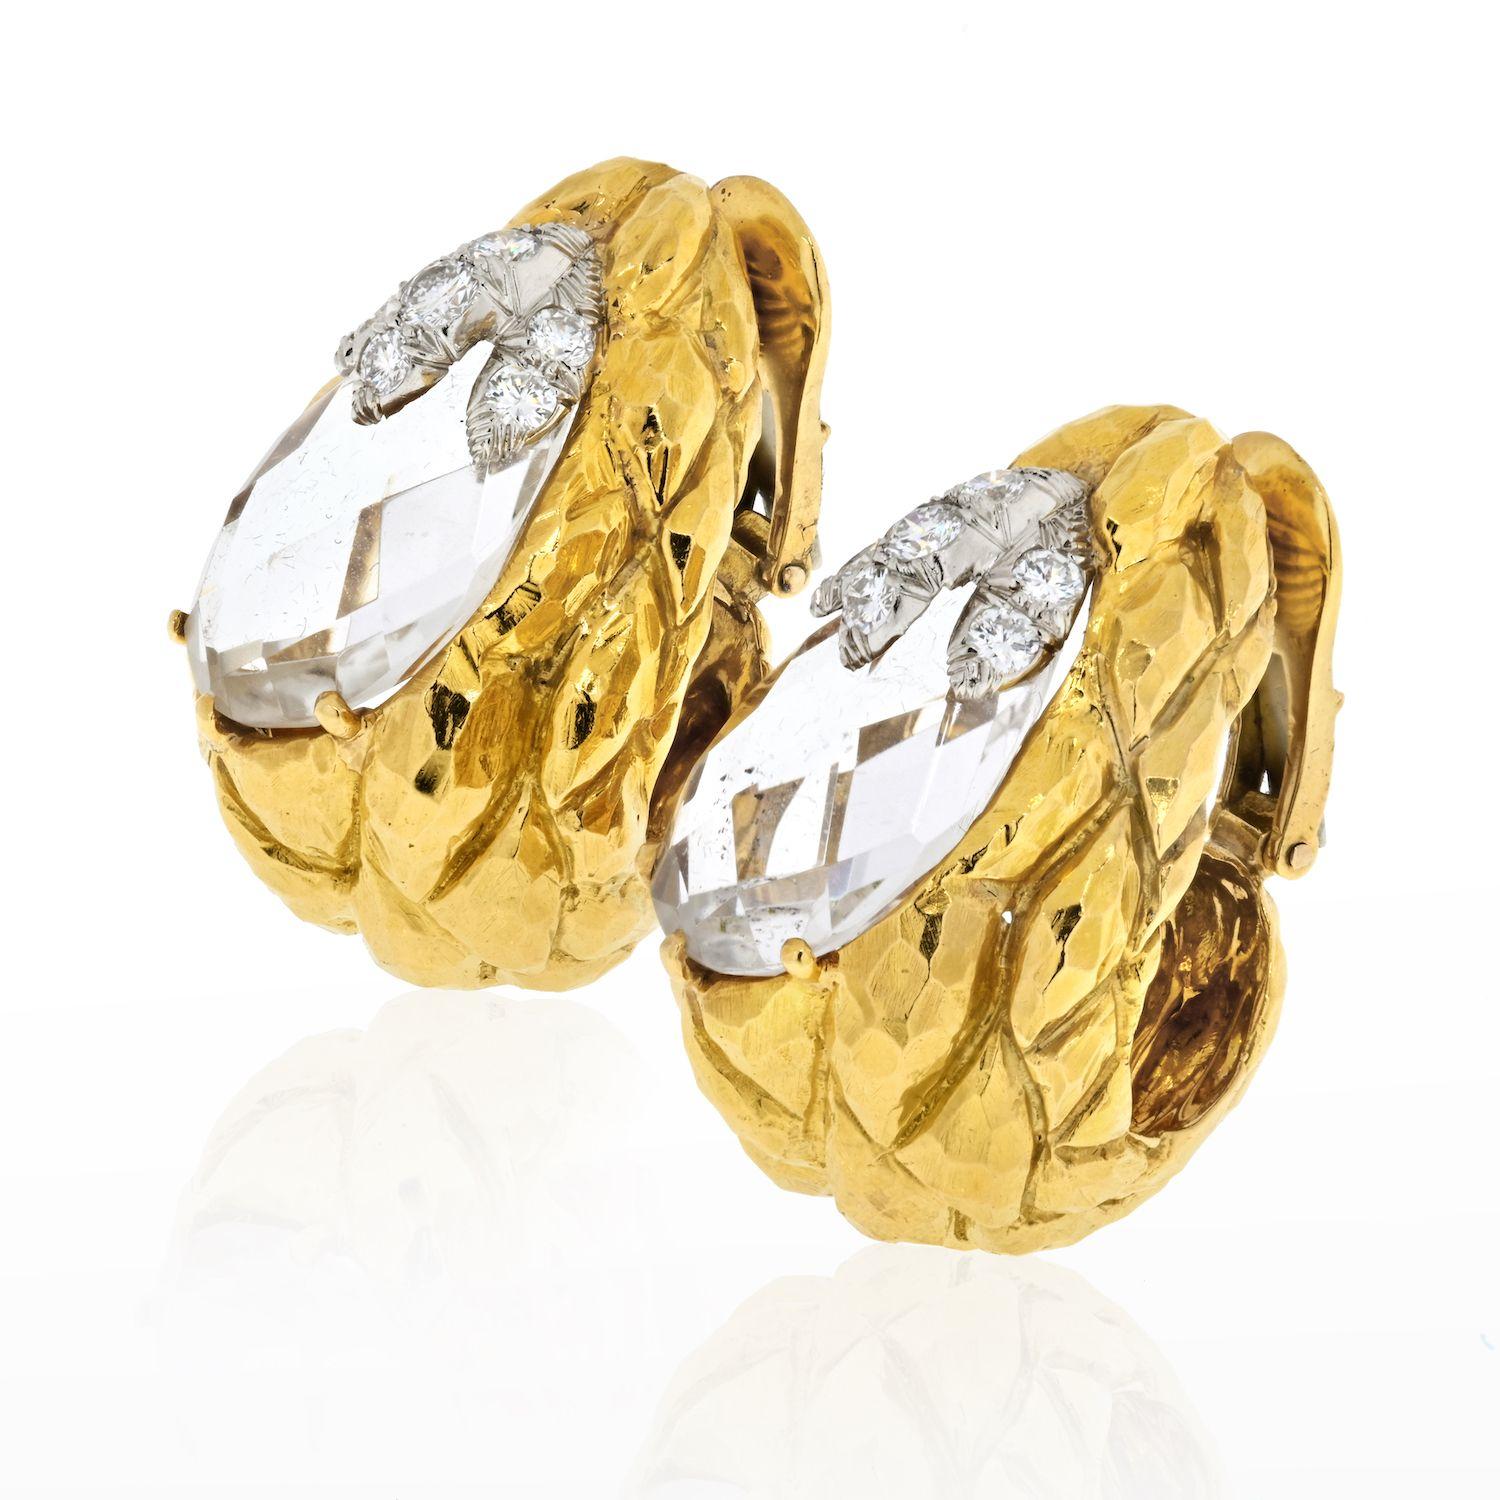 Large David Webb Platinum & 18K Yellow Gold Rock Crystal Carved Clip On Earrings. A pair of vintage David Webb earrings; featuring rose cut carved rock crystal, with gold leaf style garland tops, accented with a round brilliant-cut diamonds. Circa